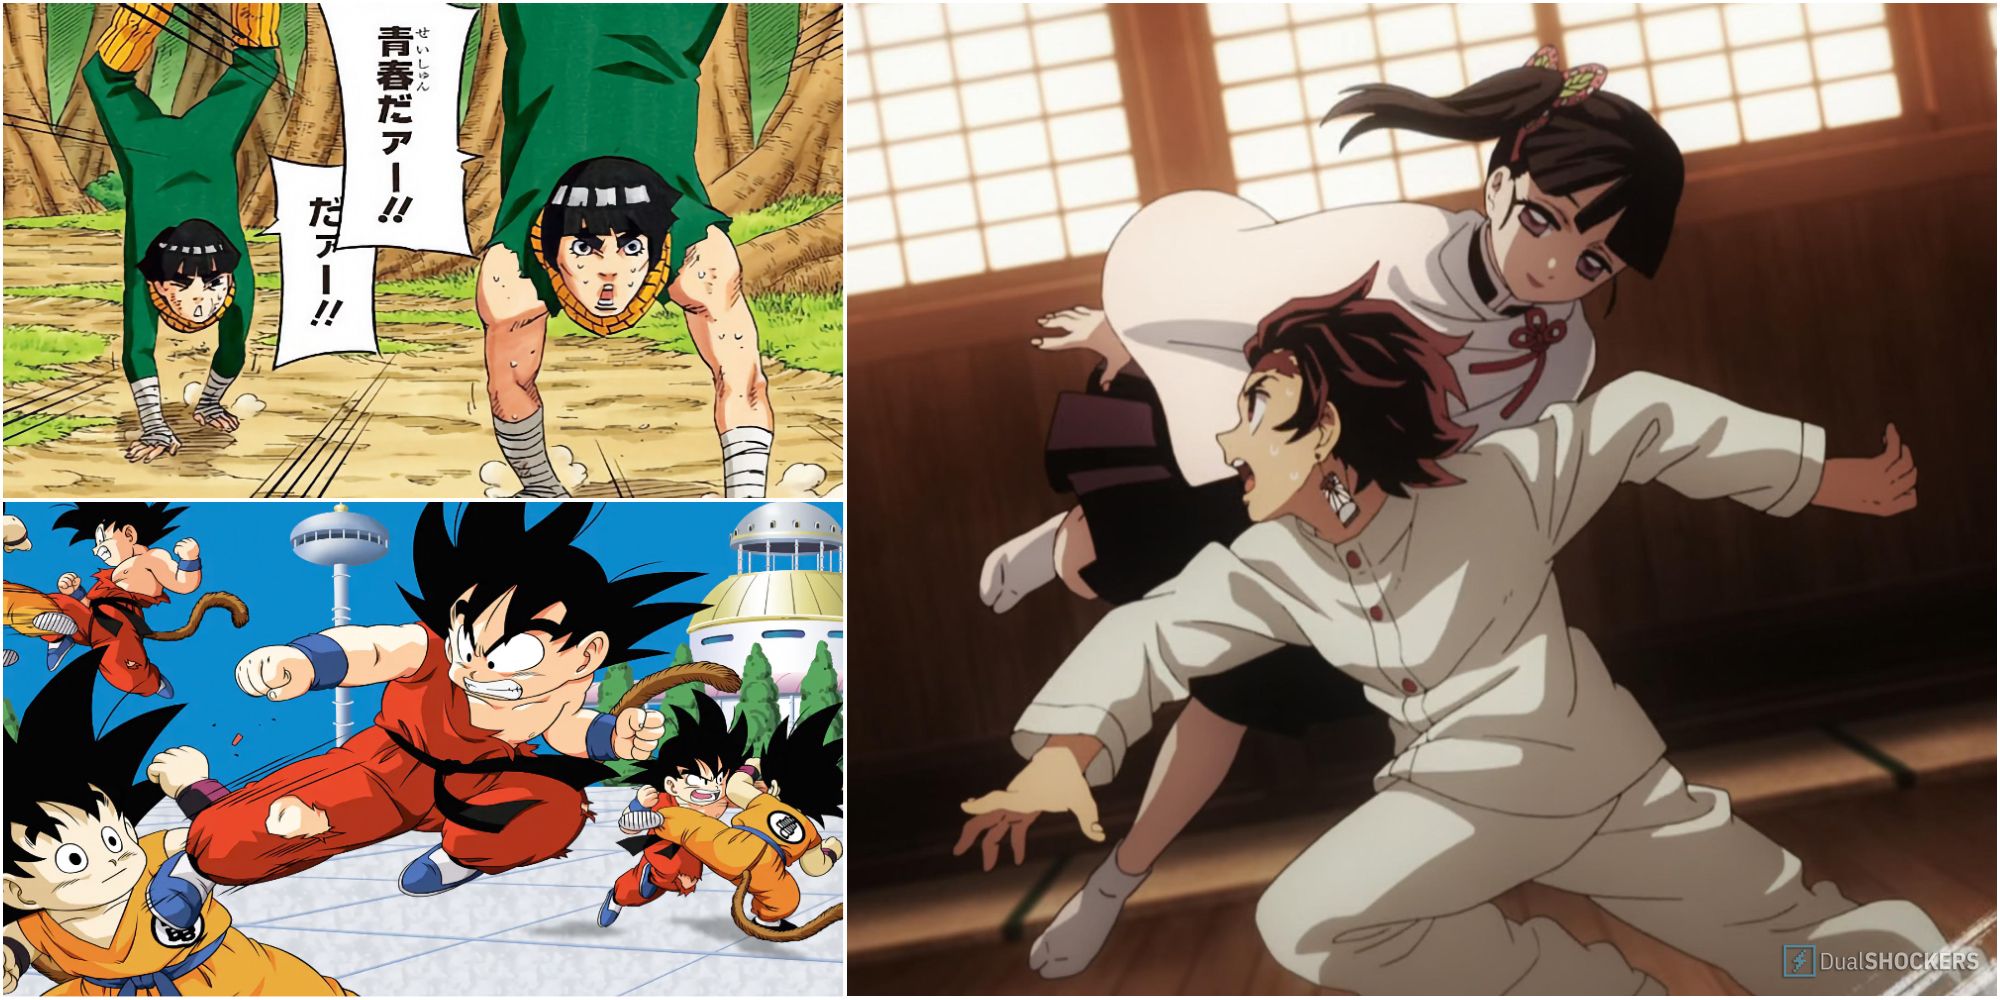 What are your top ten training scenes in anime? - Quora